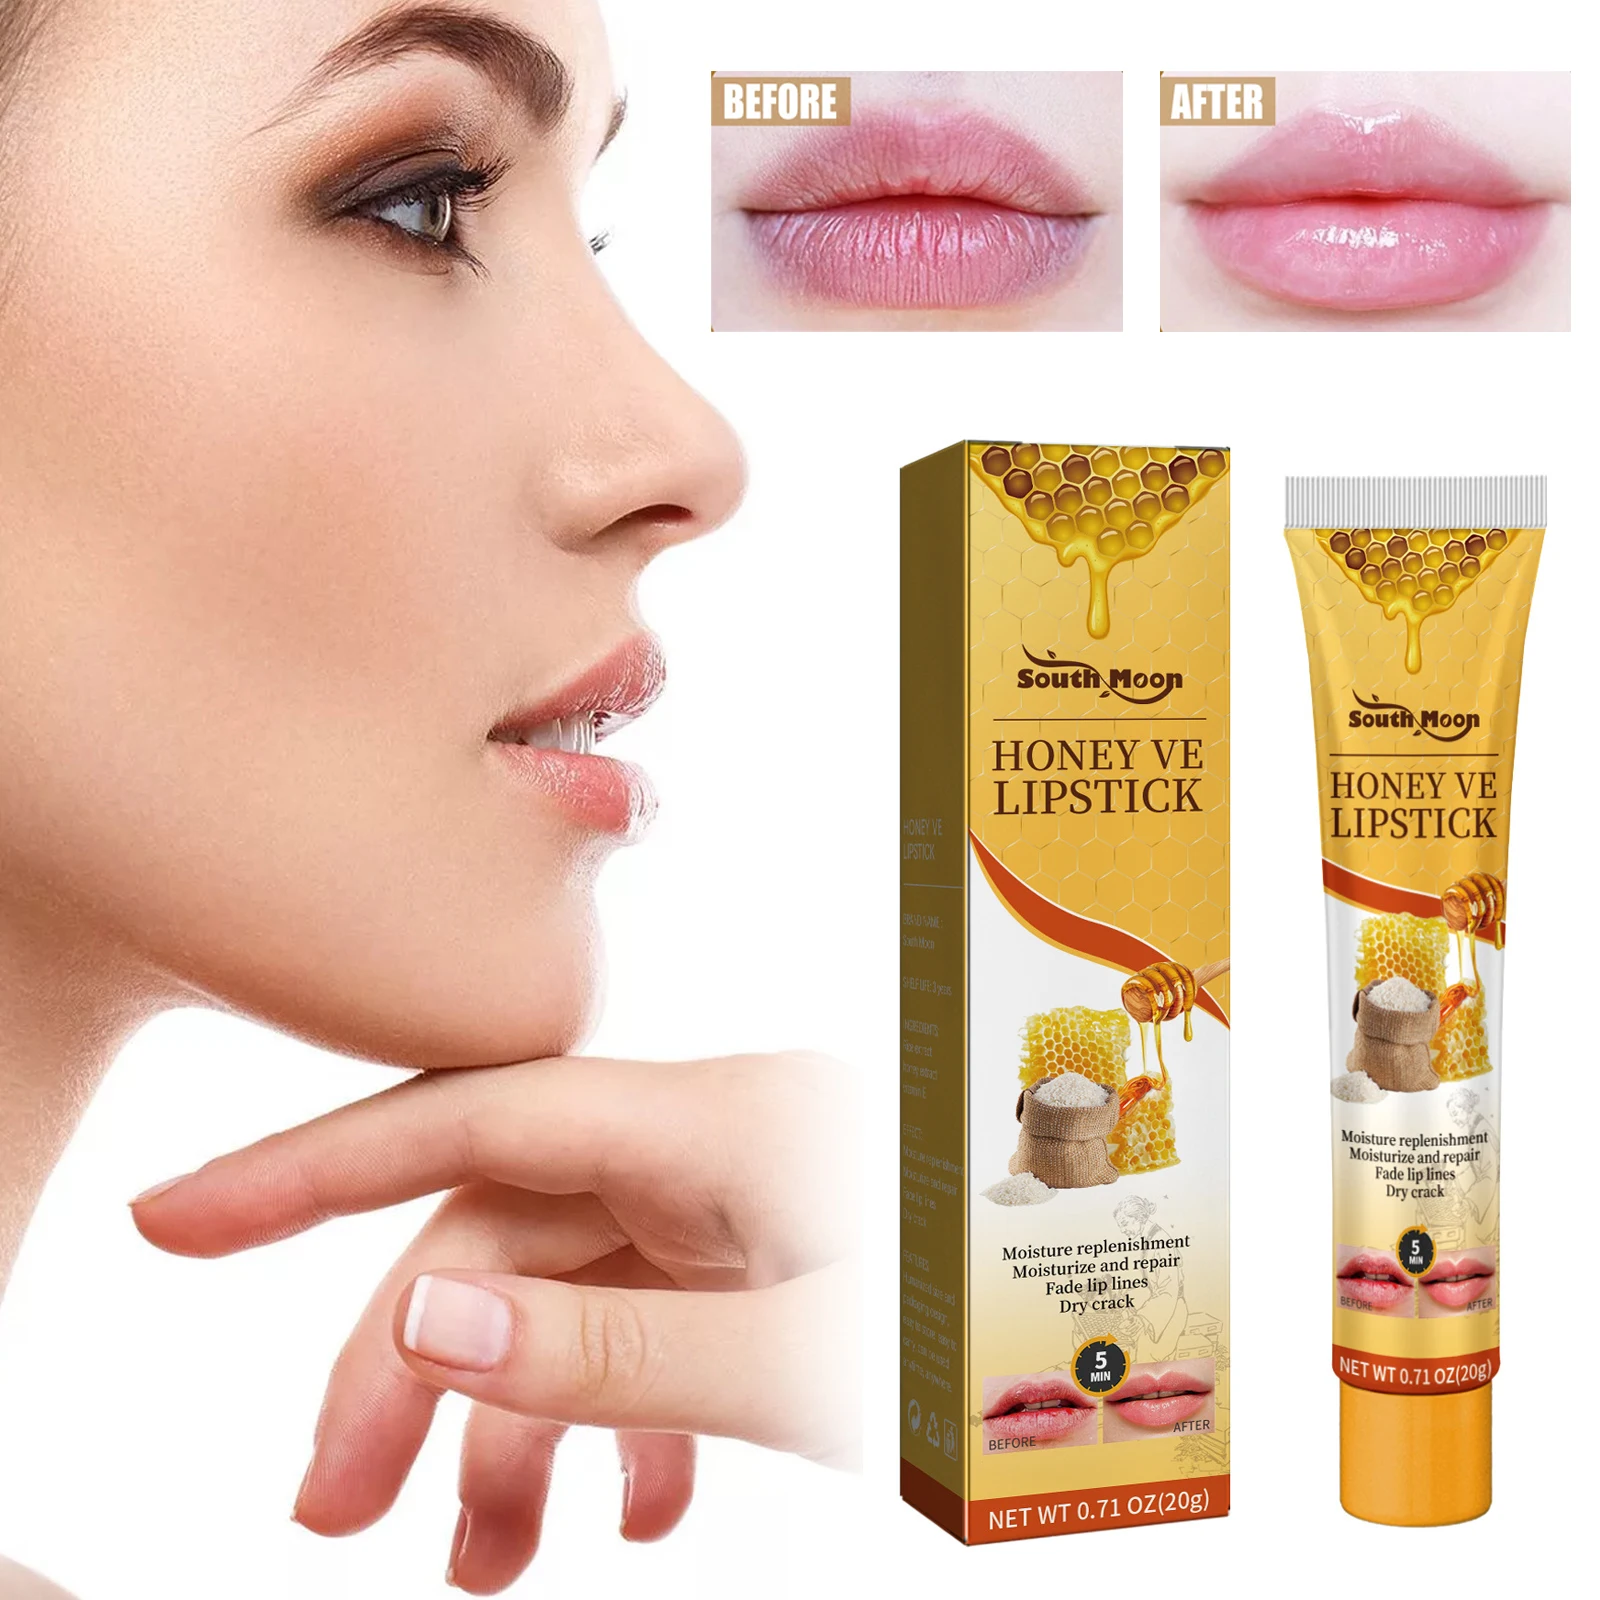 

Honey Lip Balm Anti-drying Repair Chapped Reduce Wrinkles Fade Lines Moisturizing Hydrating Lipstick Not Greasy Lip Plumper Care